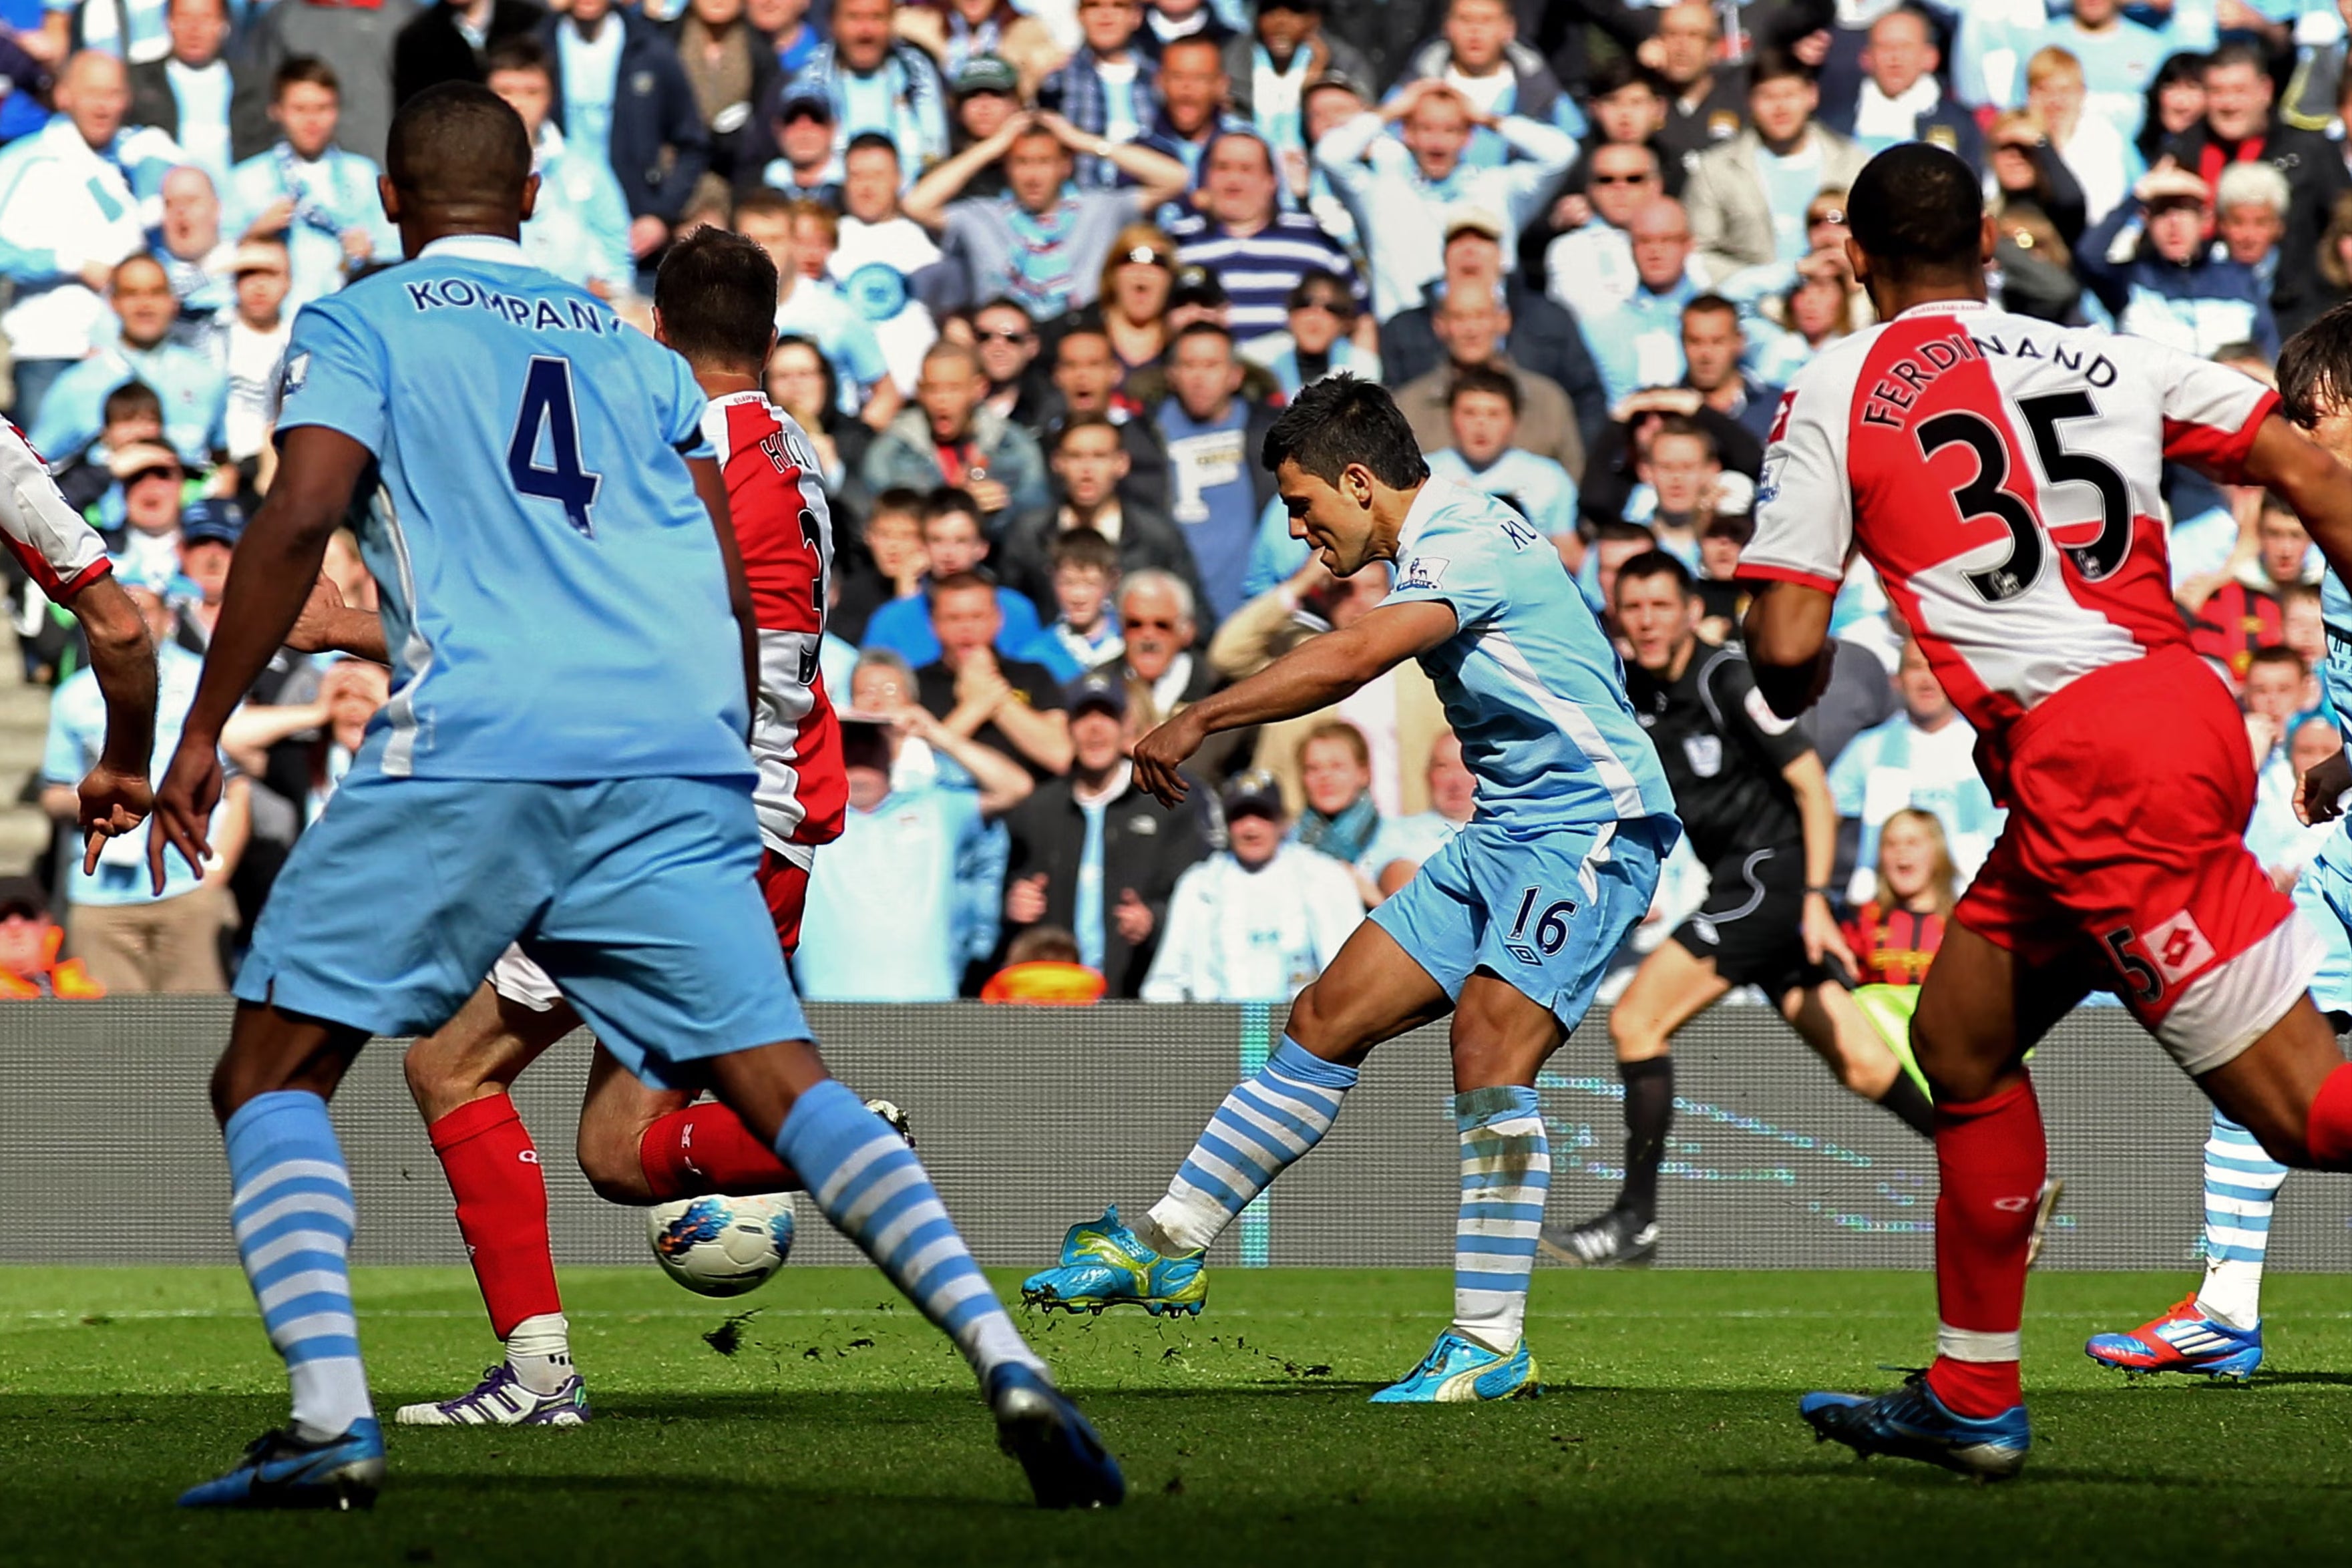 Aguero’s goal is one of the most famous in Premier League history